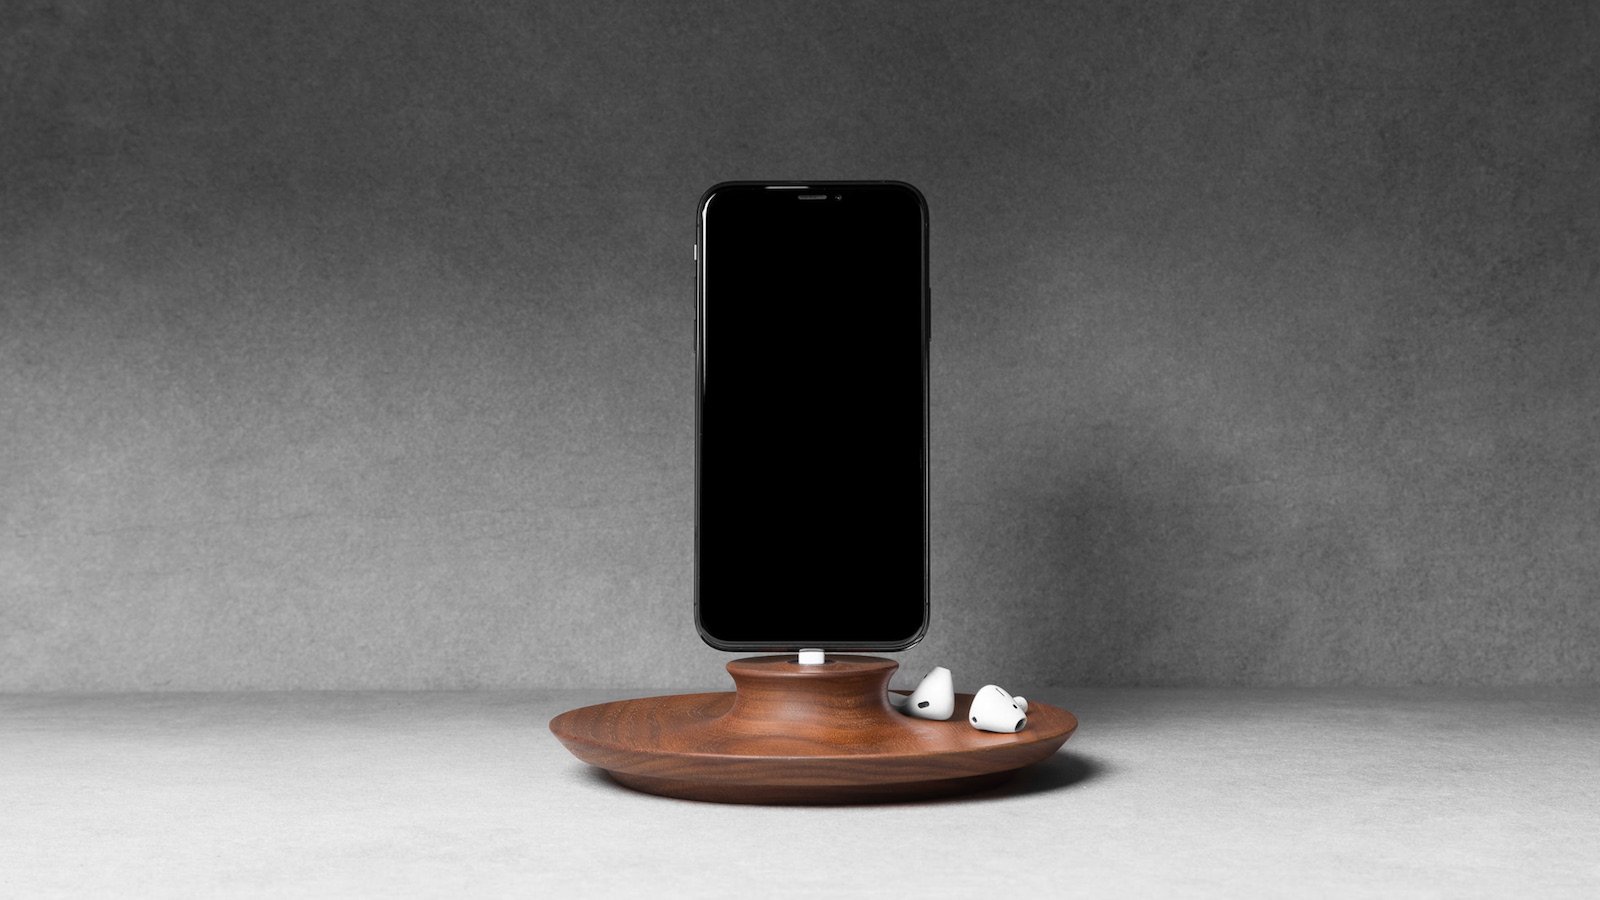 Yohann iPhone Charging Stand provides an ideal angle for viewing your device